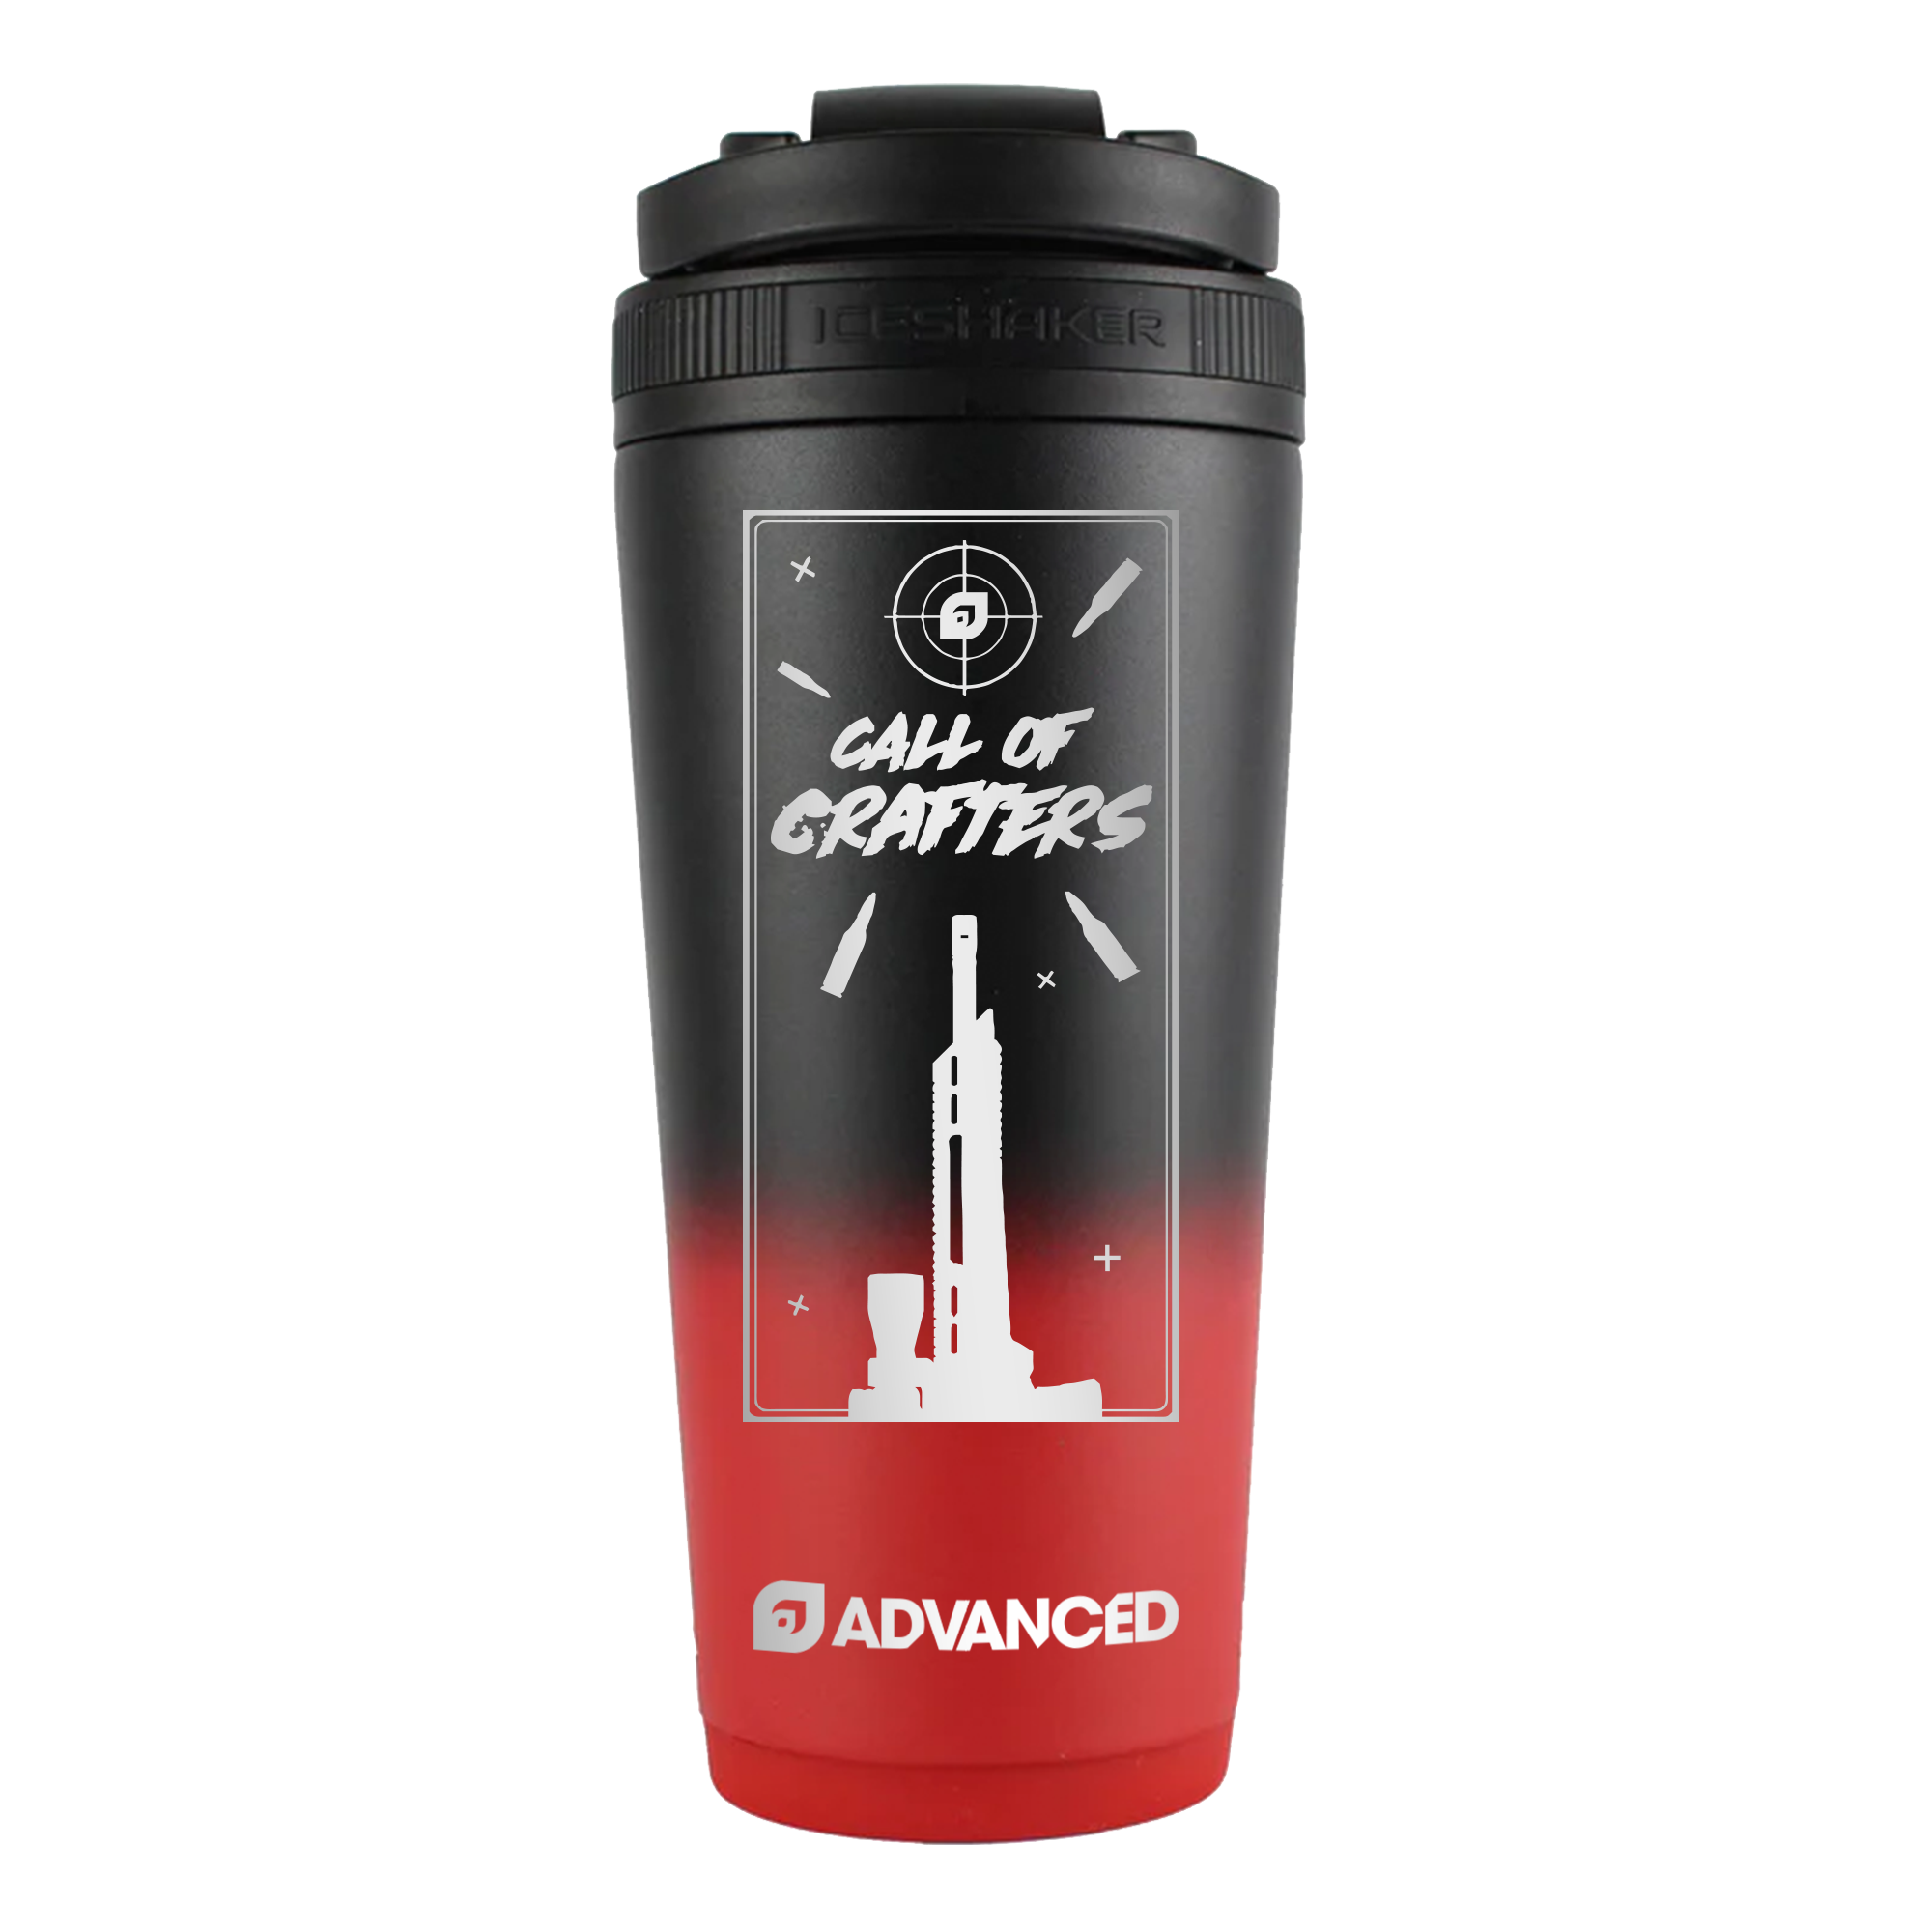 Call Of Crafters X ADVANCED Premium 26oz Ice Shaker